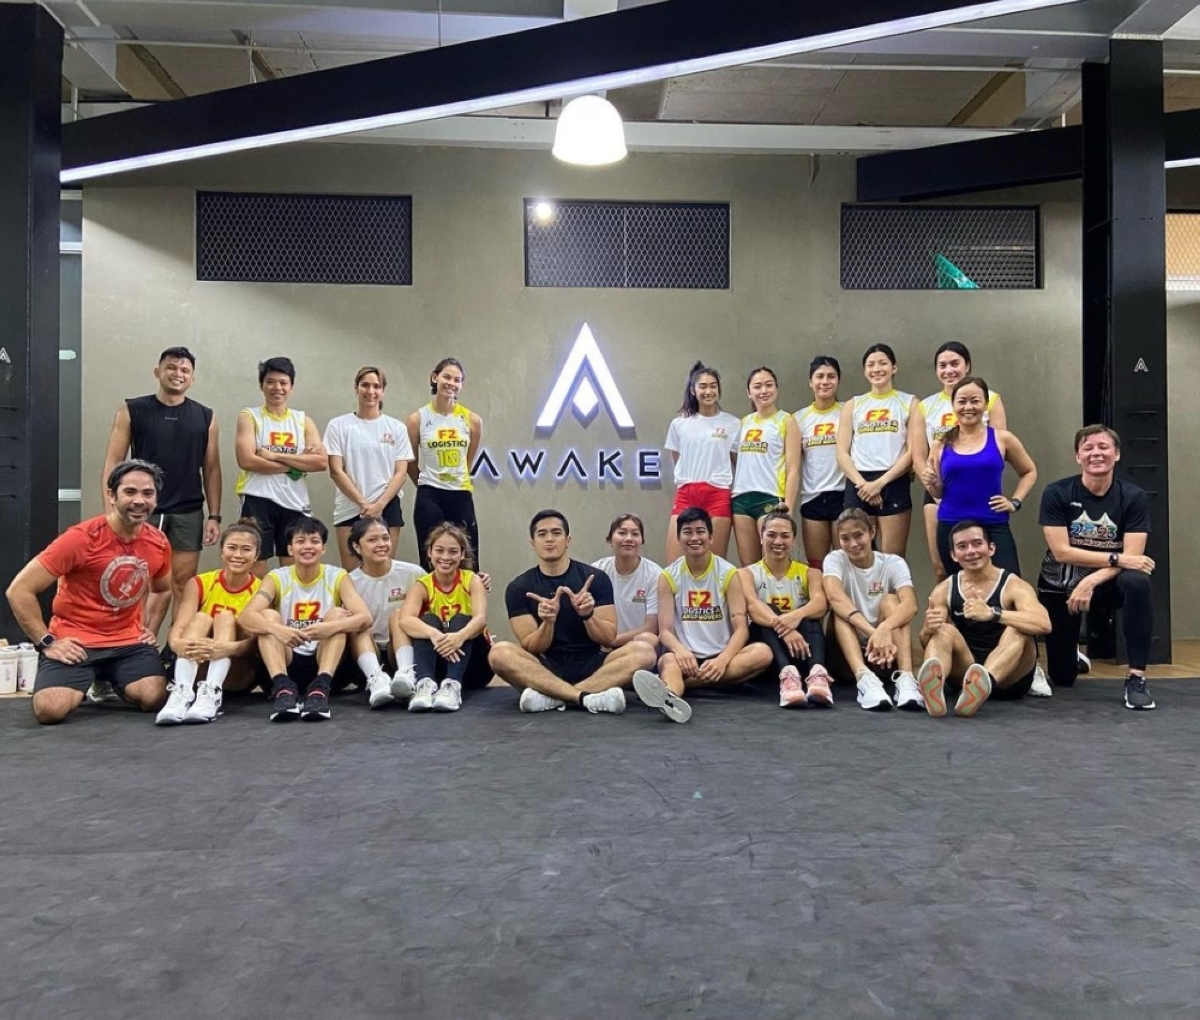 Awaken Gym is a haven for those seeking to improve their lifestyle.